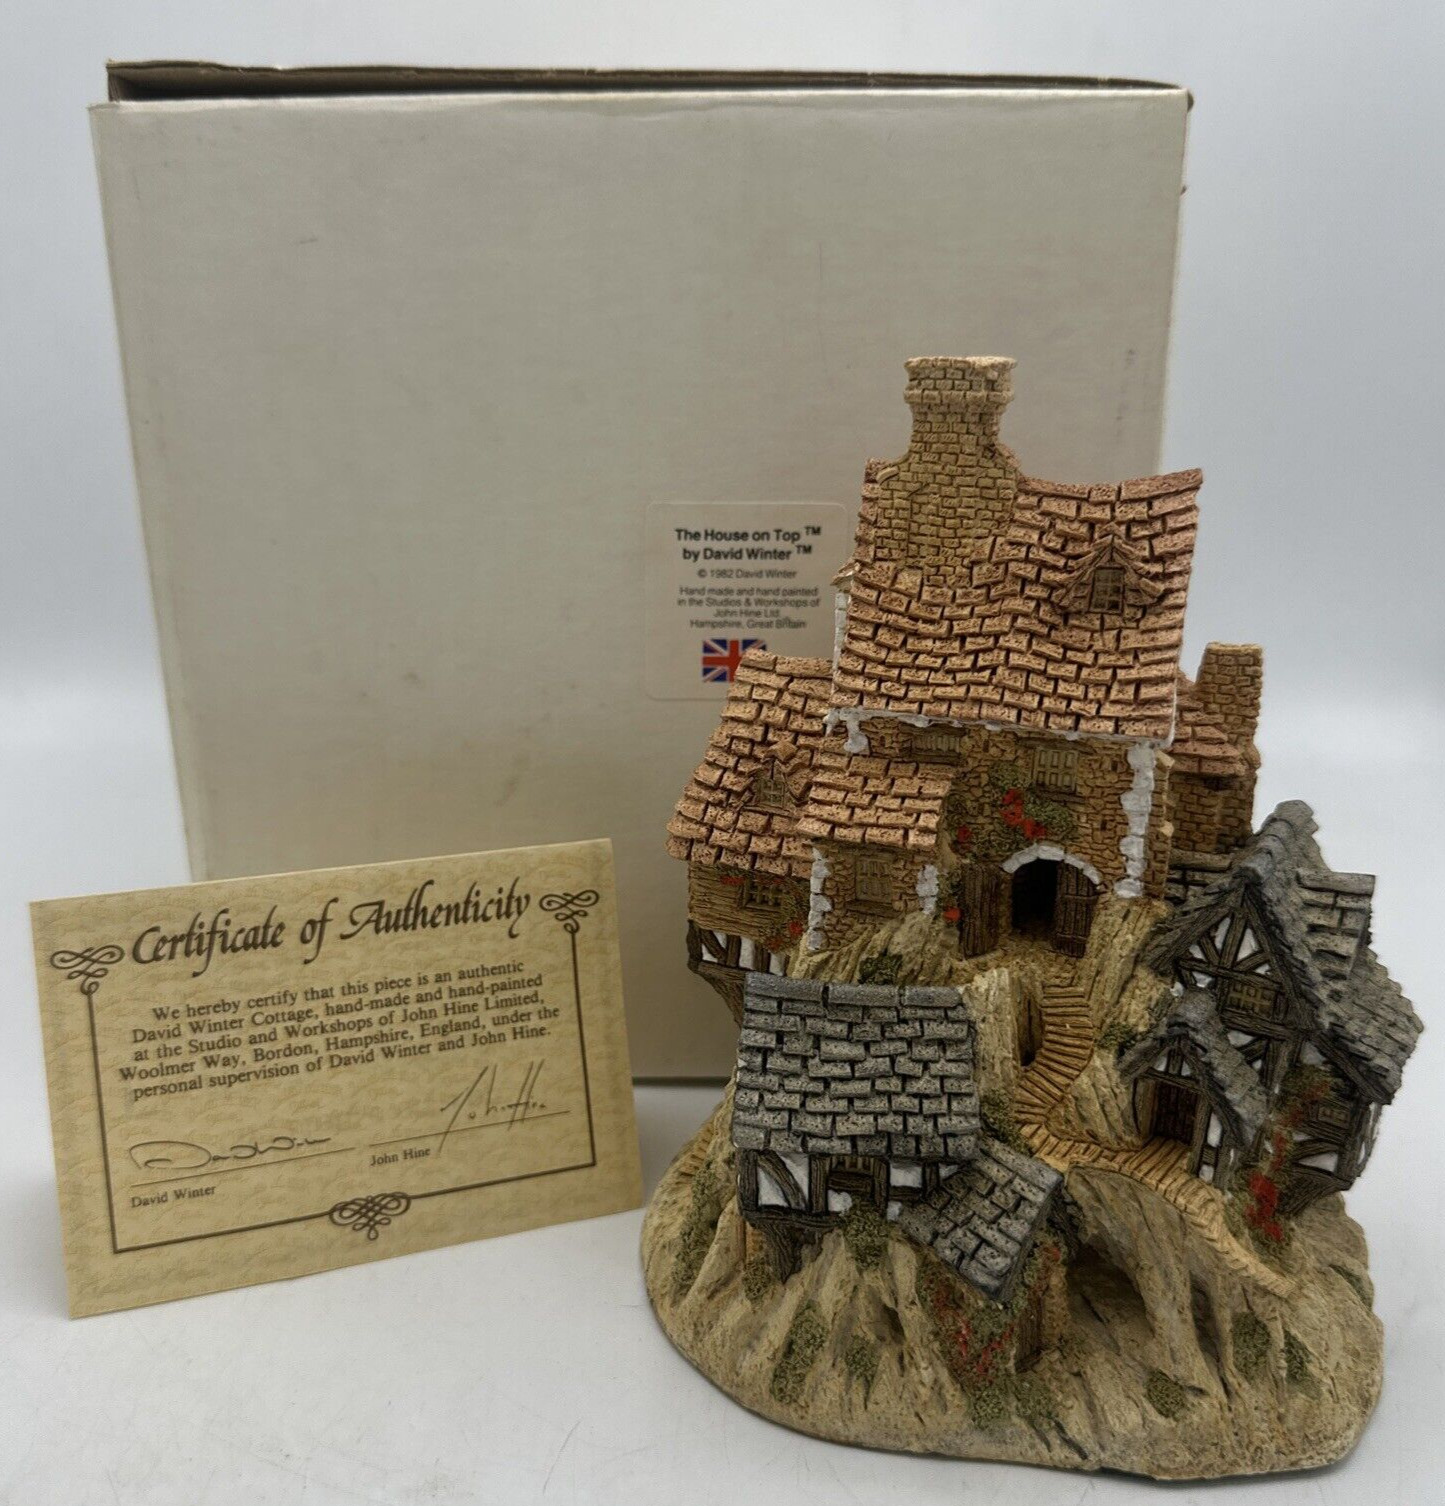 David Winter Cottages The House on Top Collection 1982 Vintage Box and COA